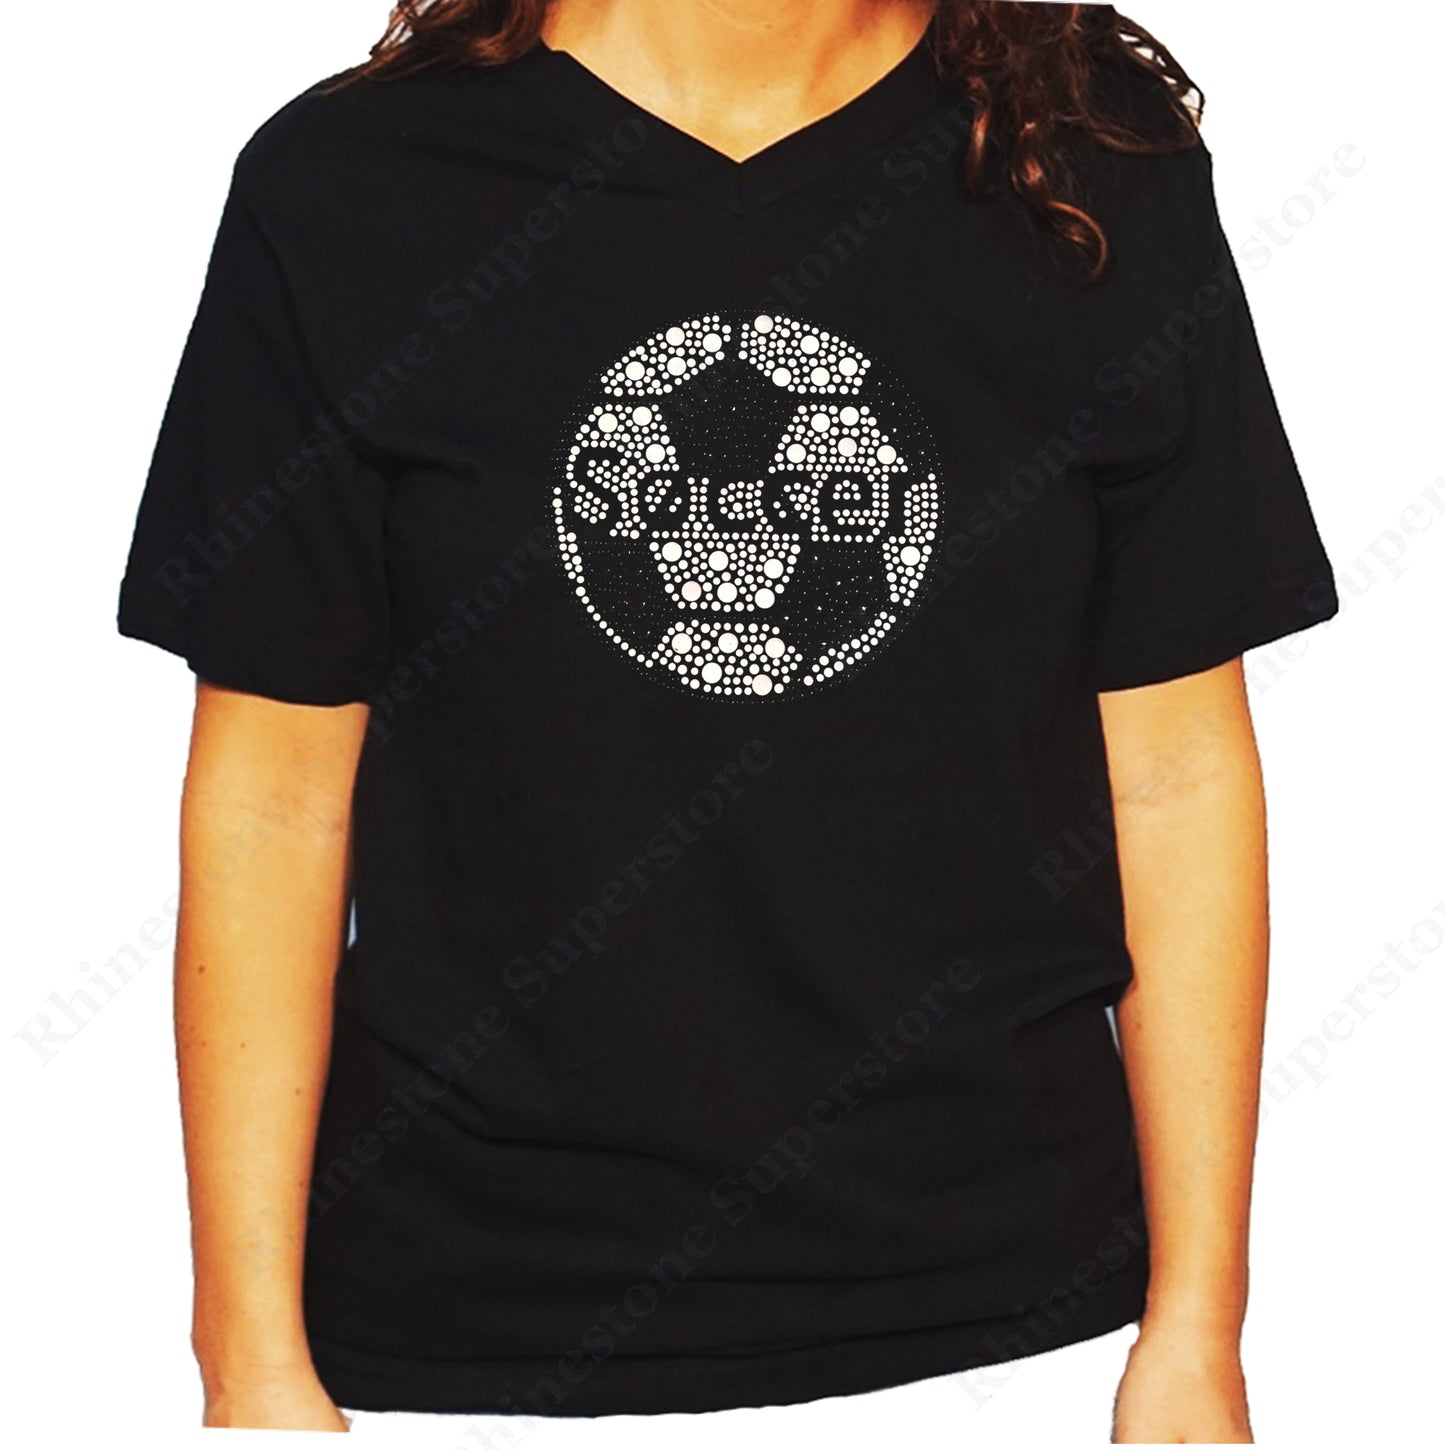 Women's / Unisex T-Shirt with Soccer Ball in Rhinestuds